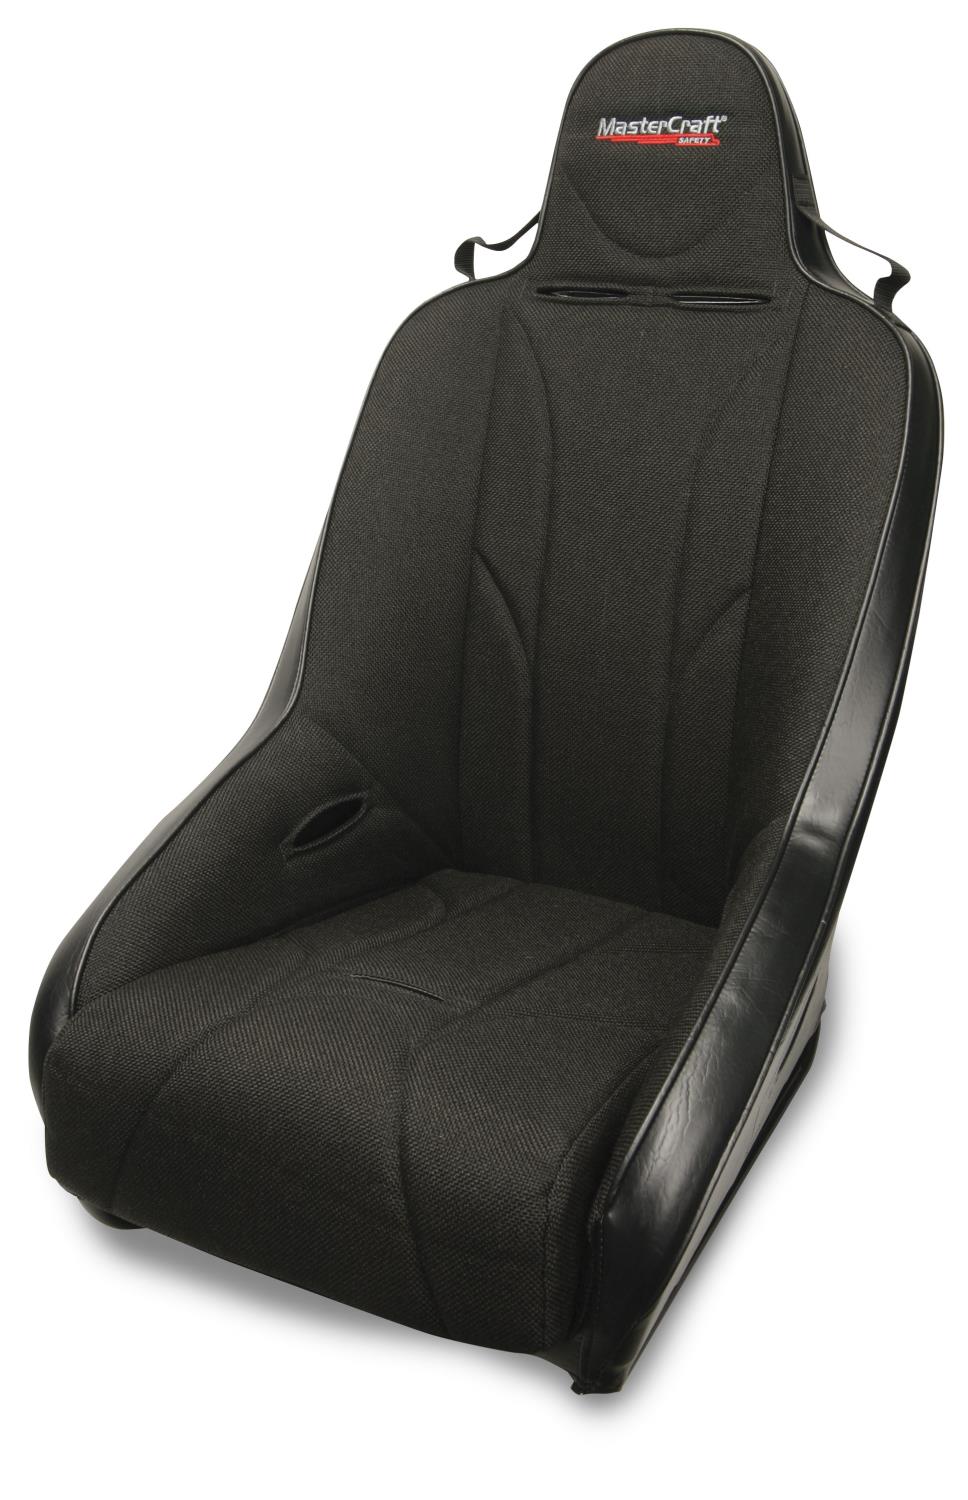 561214 2 in. WIDER PROSeat w/Fixed Headrest, Black with Black Fabric Removable Cushion, Black Side Panels, Black Band